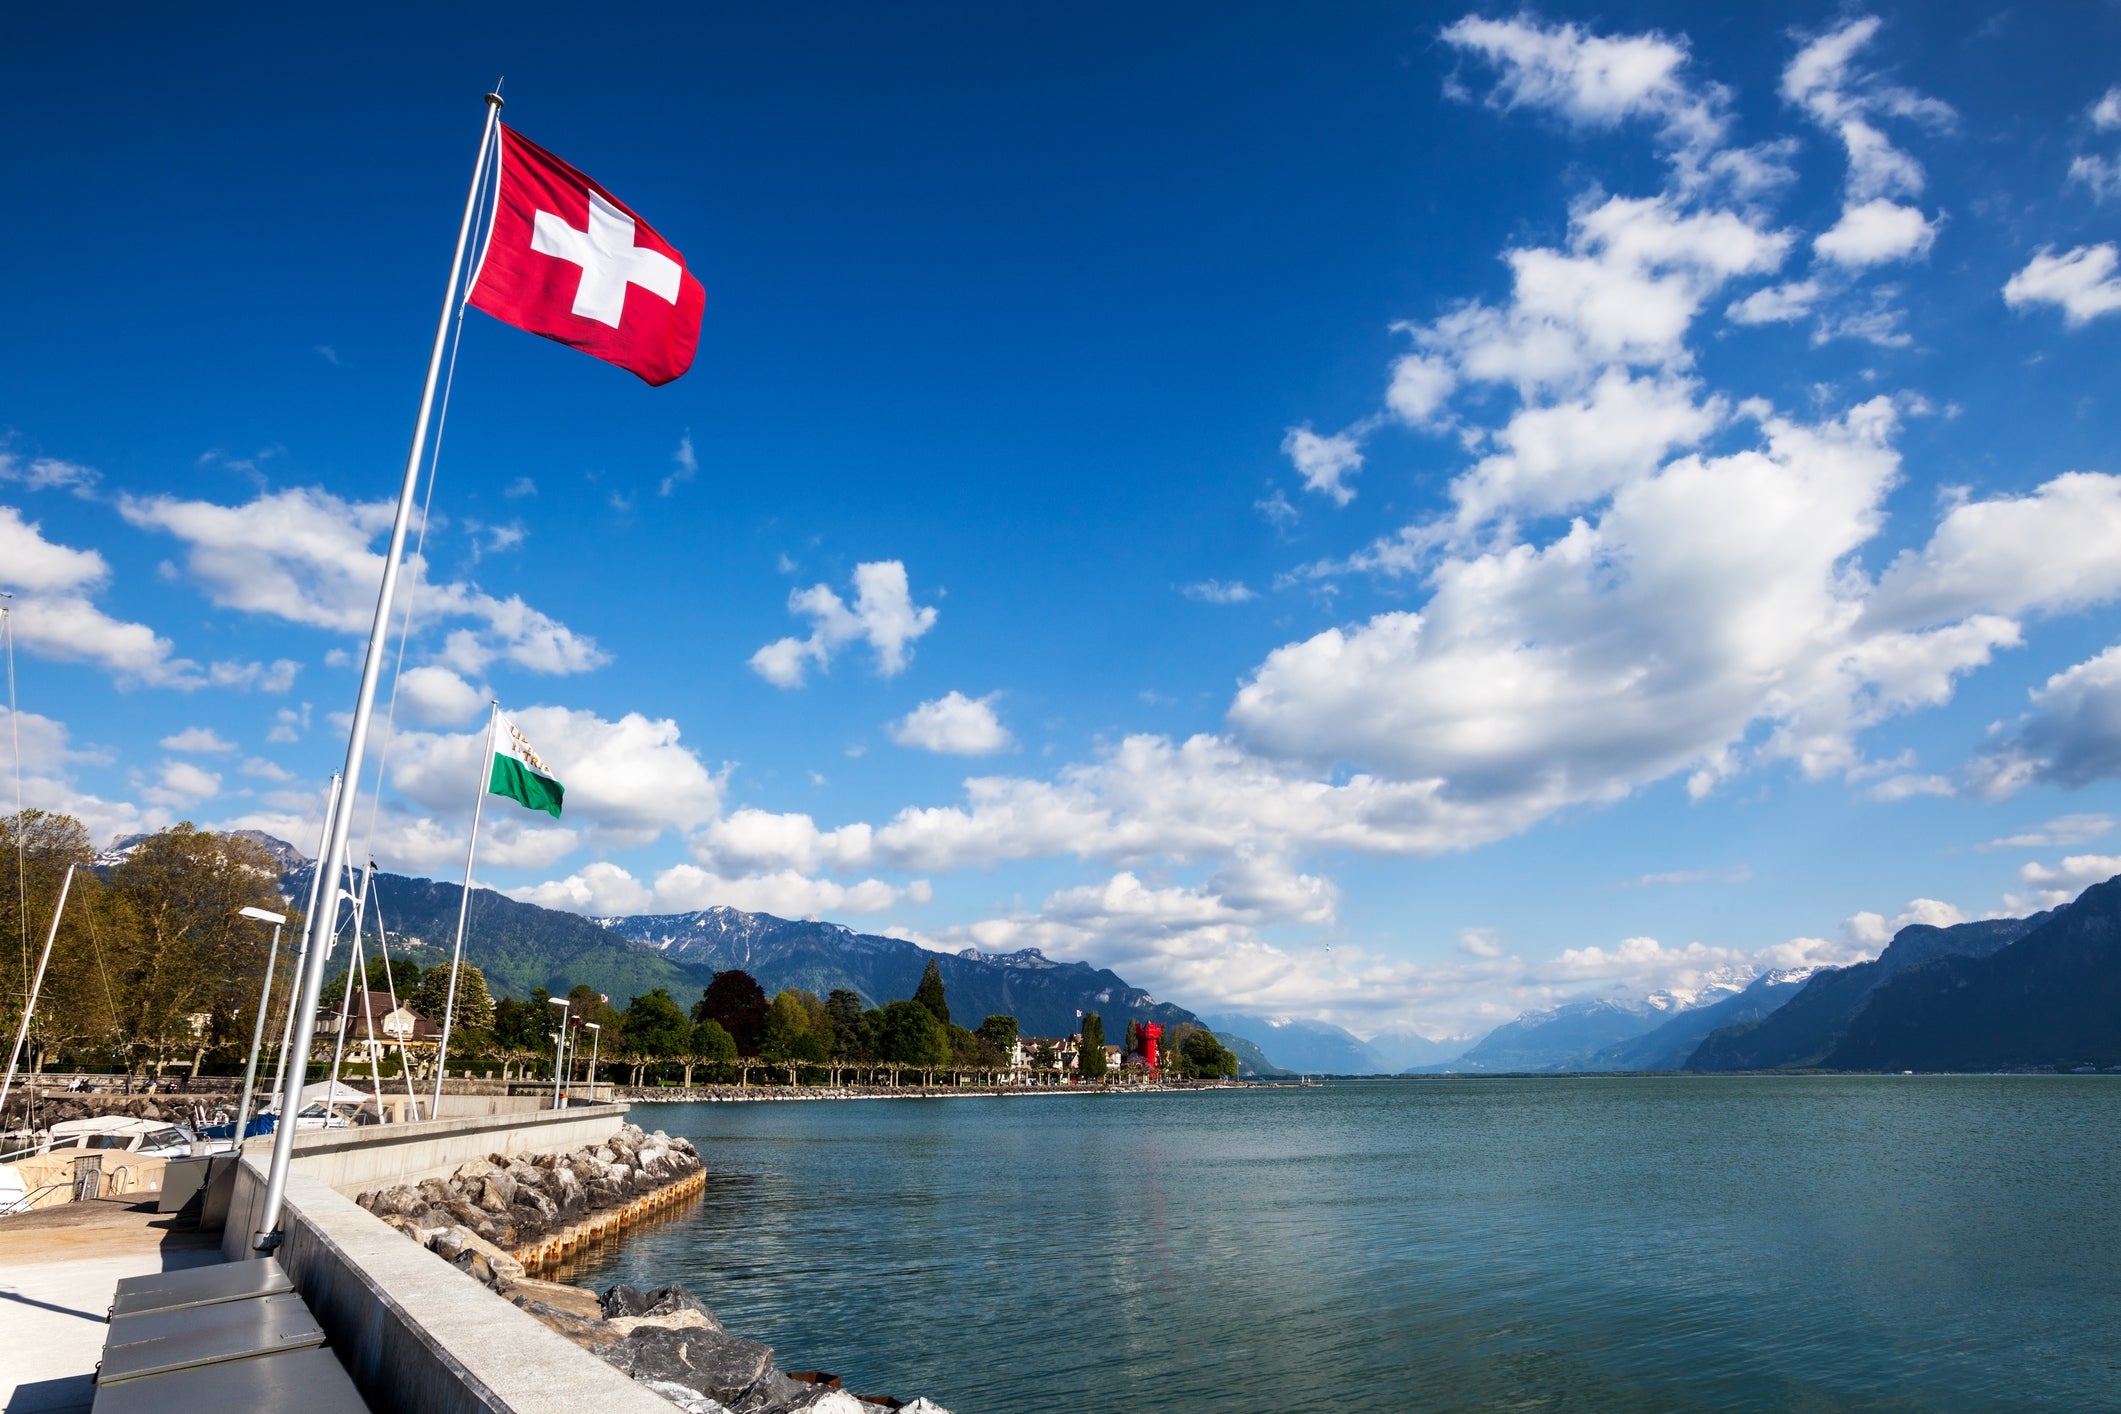 Vevey, Switzerland: A once-in-a-generation winegrowers’ festival on the Swiss Riviera